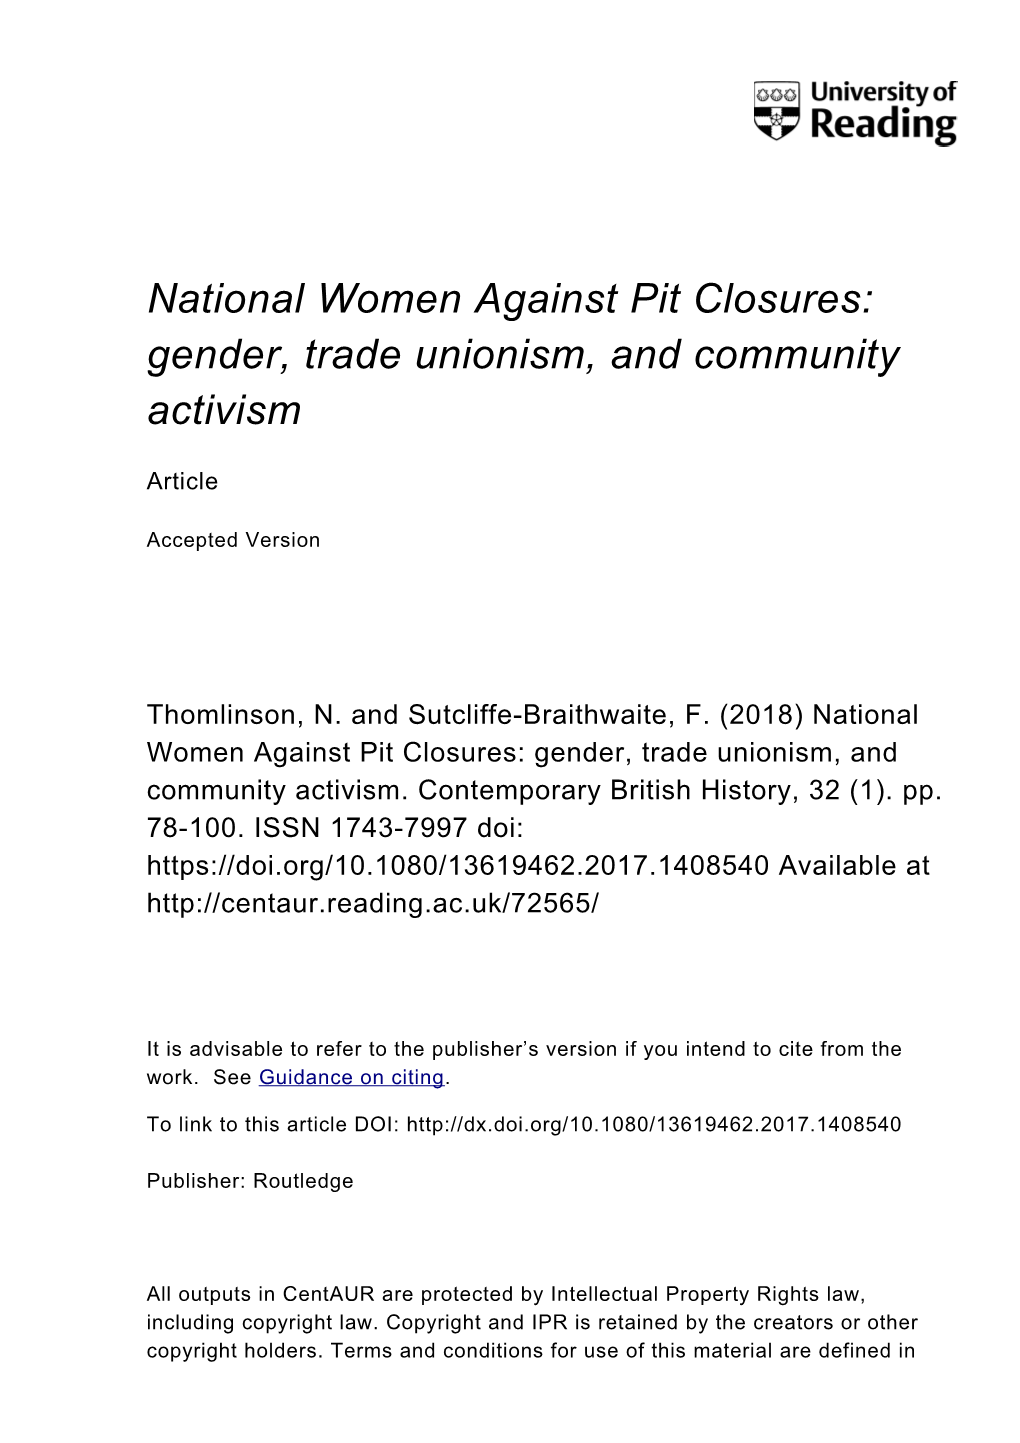 National Women Against Pit Closures: Gender, Trade Unionism, and Community Activism